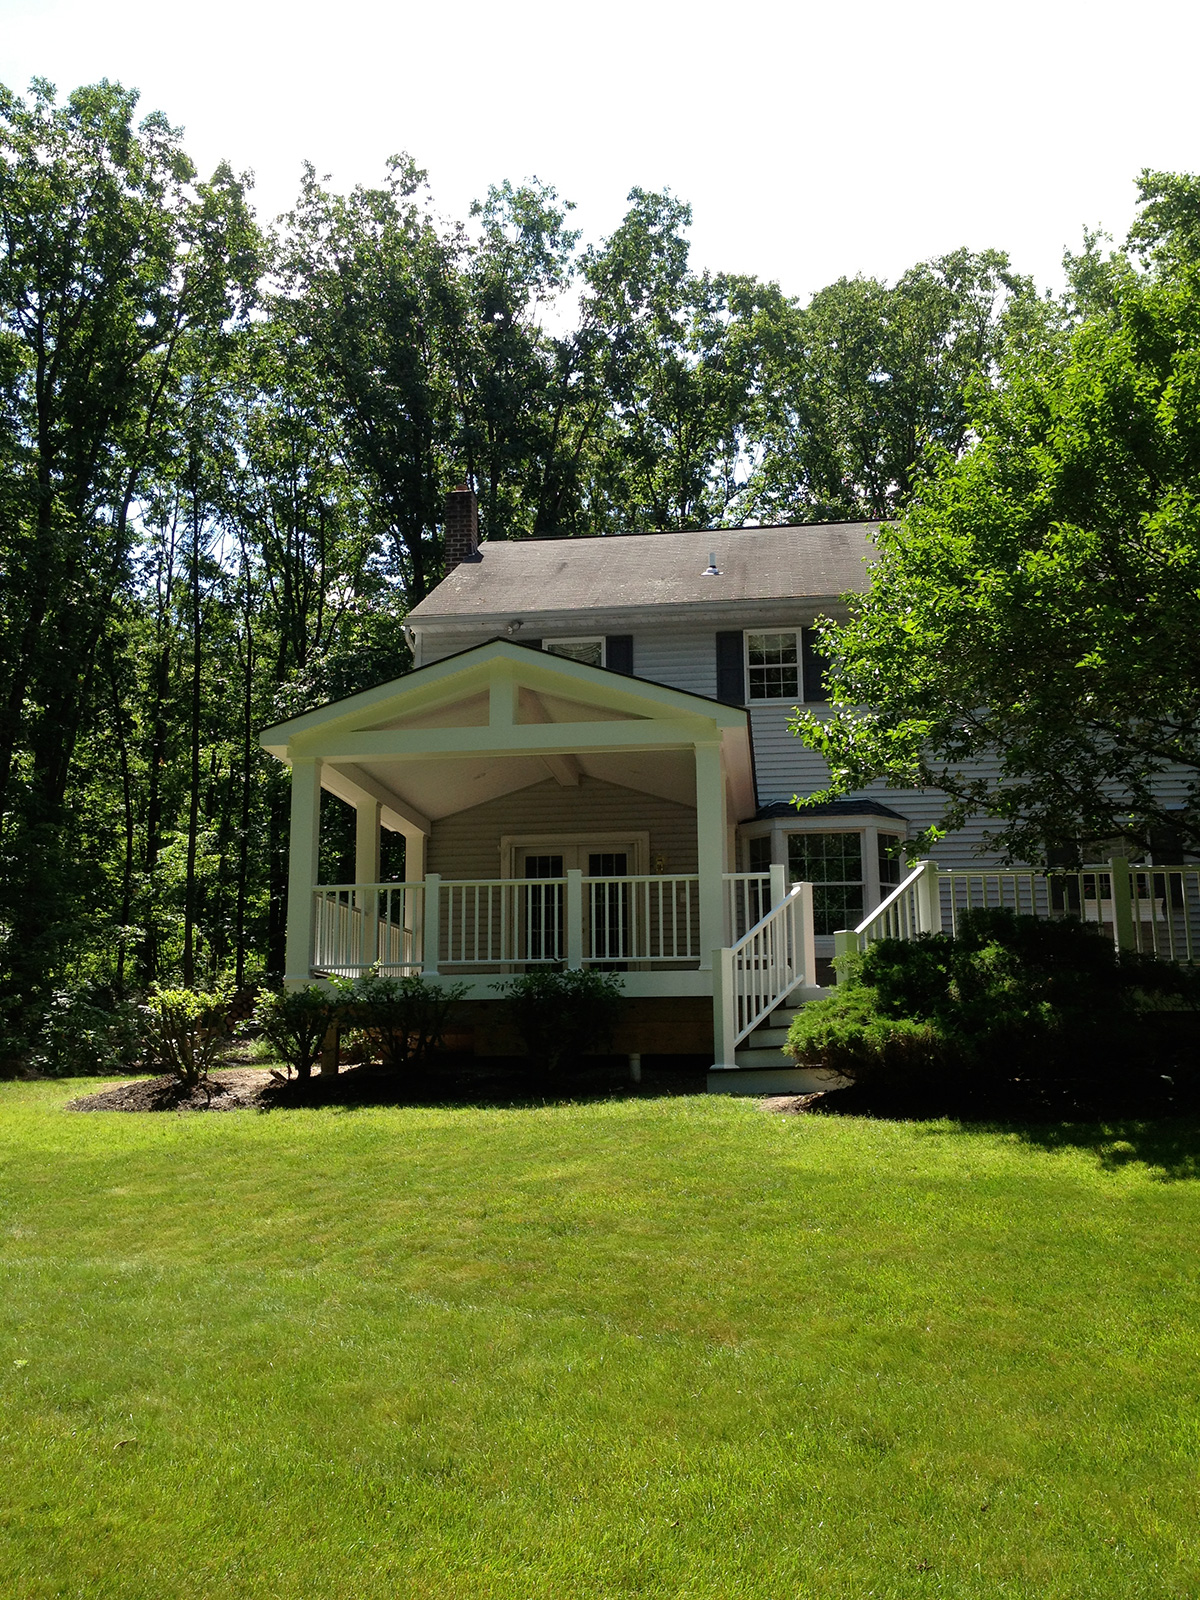 Crafting a Stunning New Deck in Fleetwood, PA